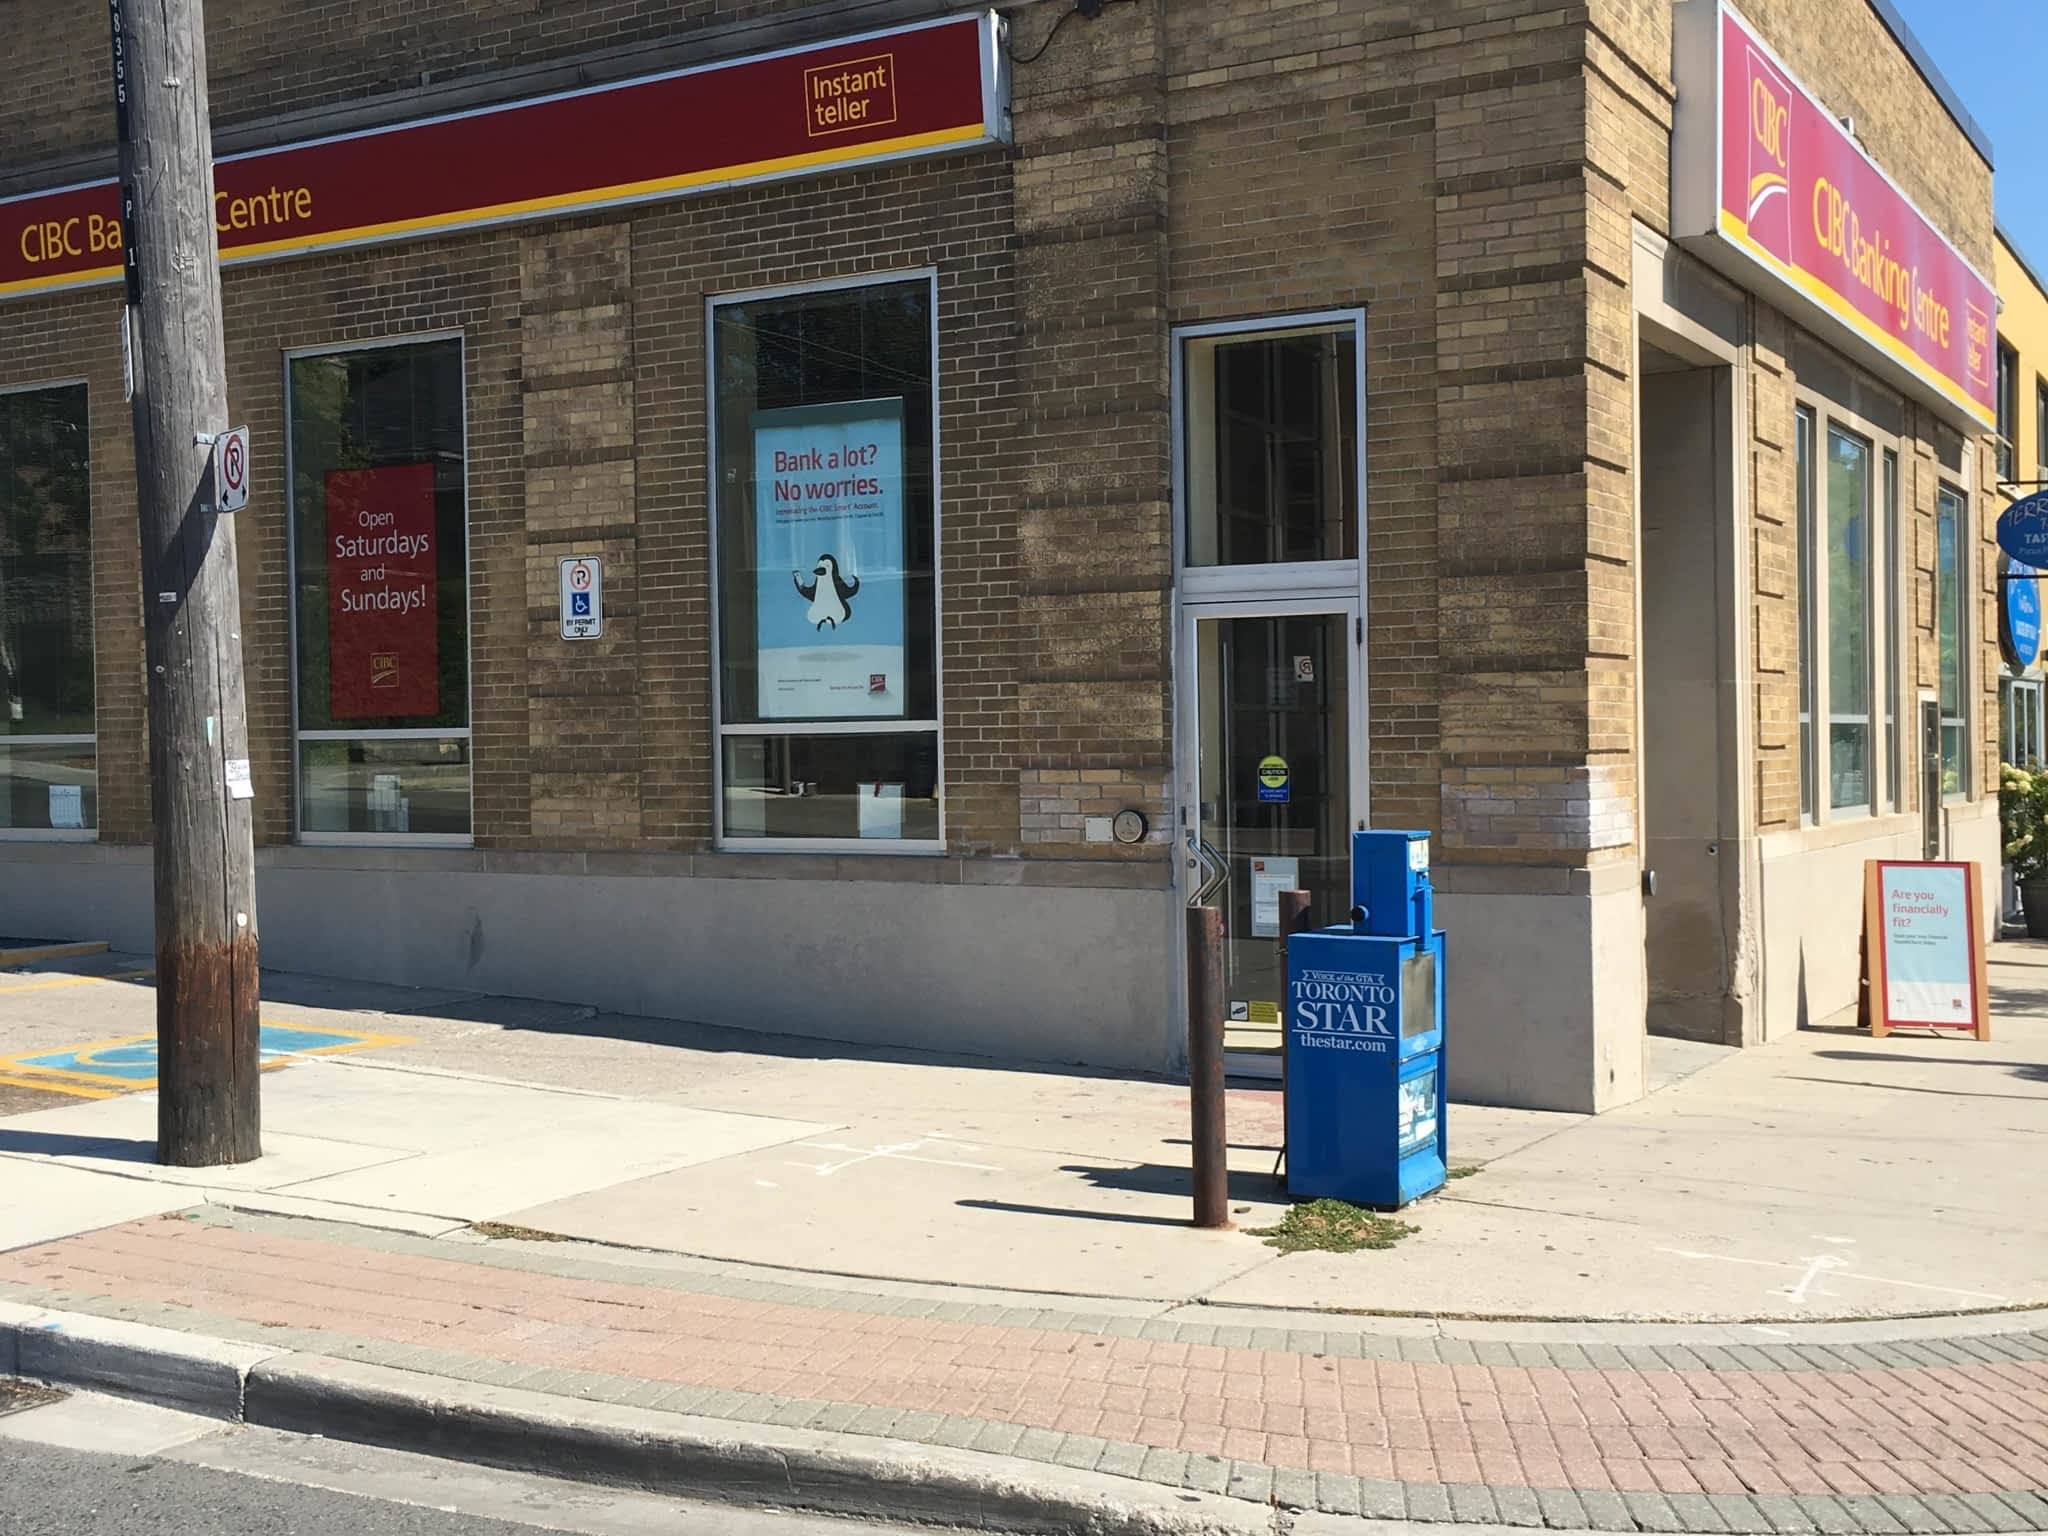 photo CIBC Branch with ATM (Cash at ATM only)